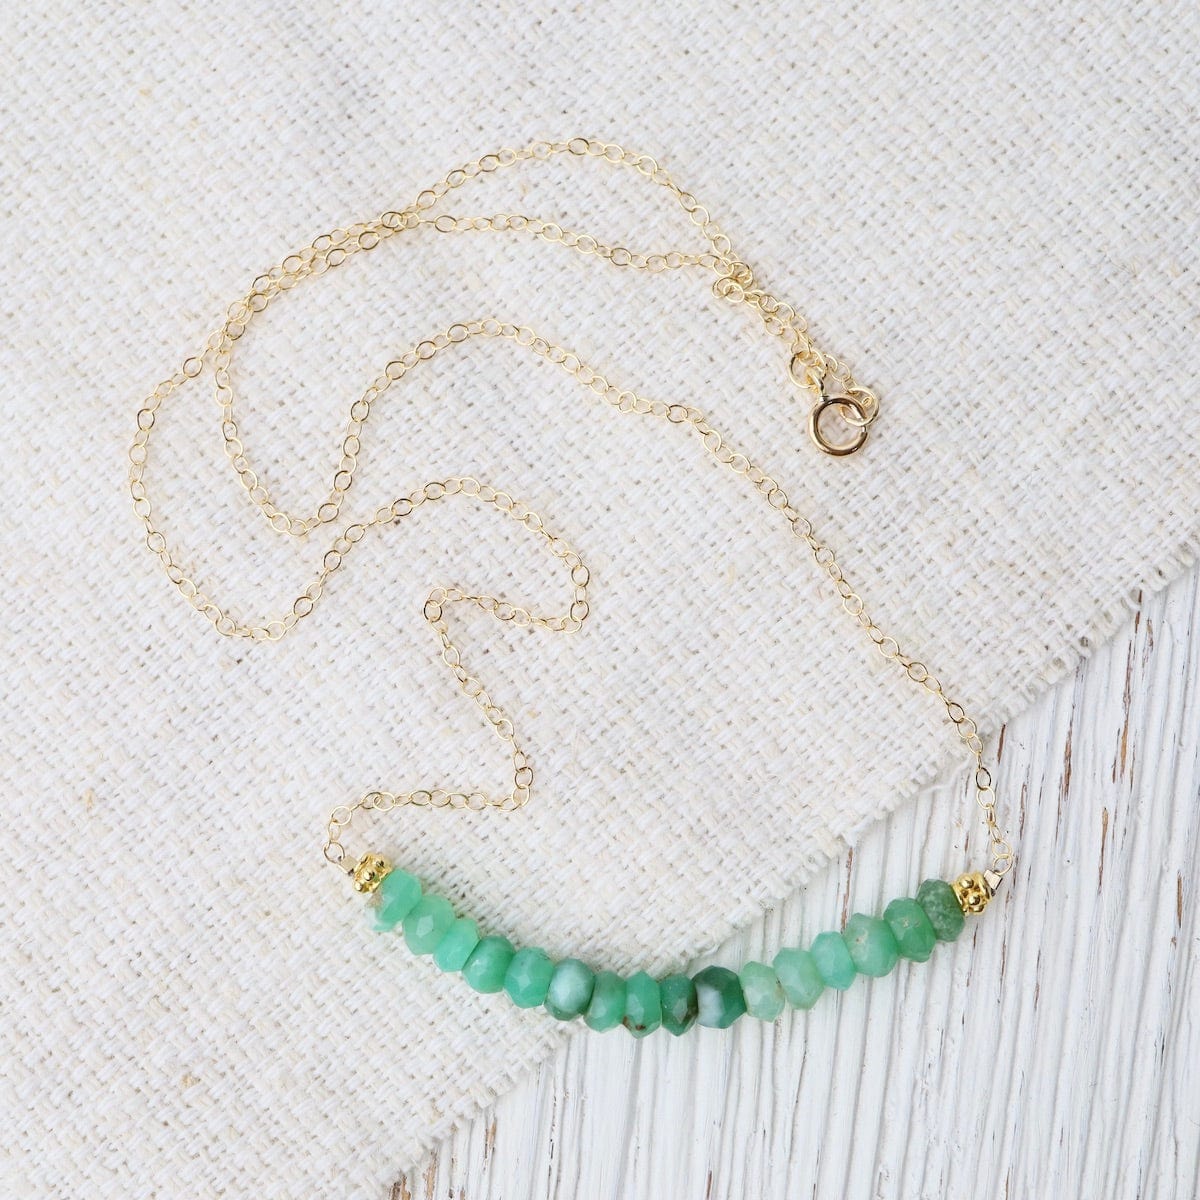 NKL-GF Gold Filled Chain with Gemstone Arc - Chrysoprase